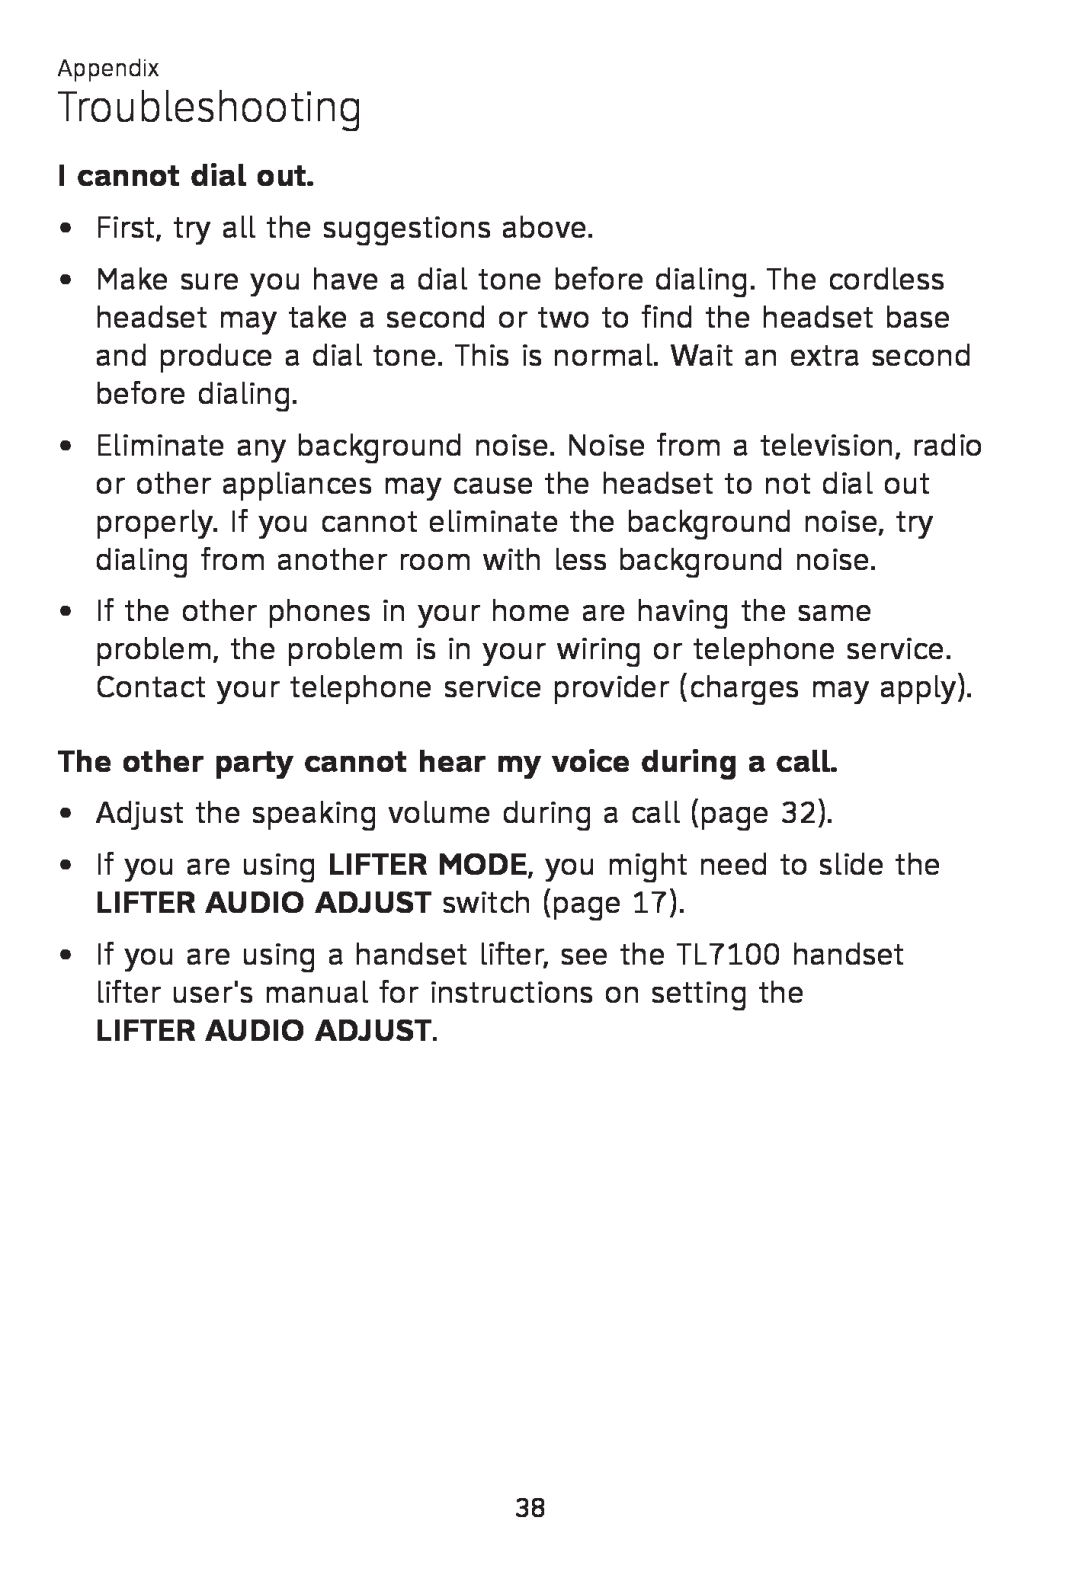 AT&T TL 7610 I cannot dial out, The other party cannot hear my voice during a call, Lifter Audio Adjust, Troubleshooting 